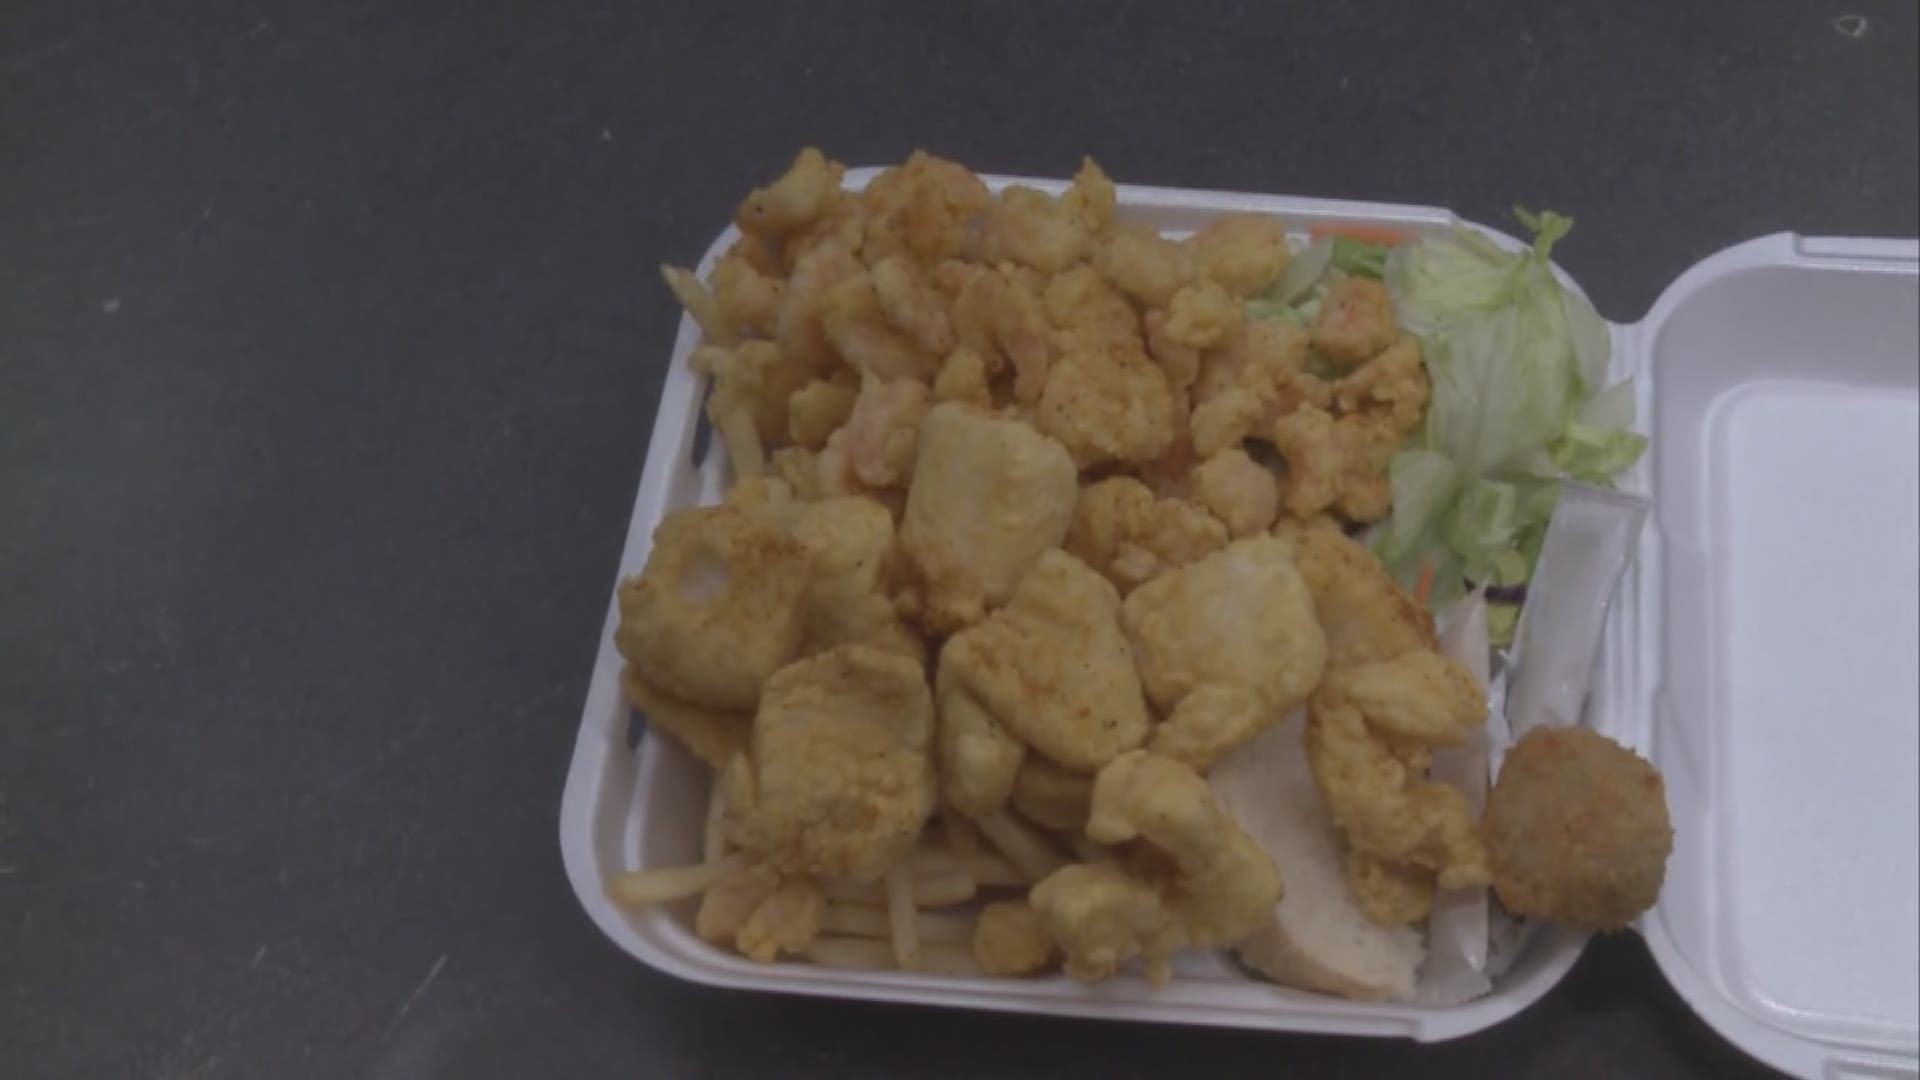 It is the first Friday of the Lenten season and many Catholics schools and churches are kicking it off with fish fry Friday. Katie Steiner shows us what St. Jerome Catholic Church is serving.